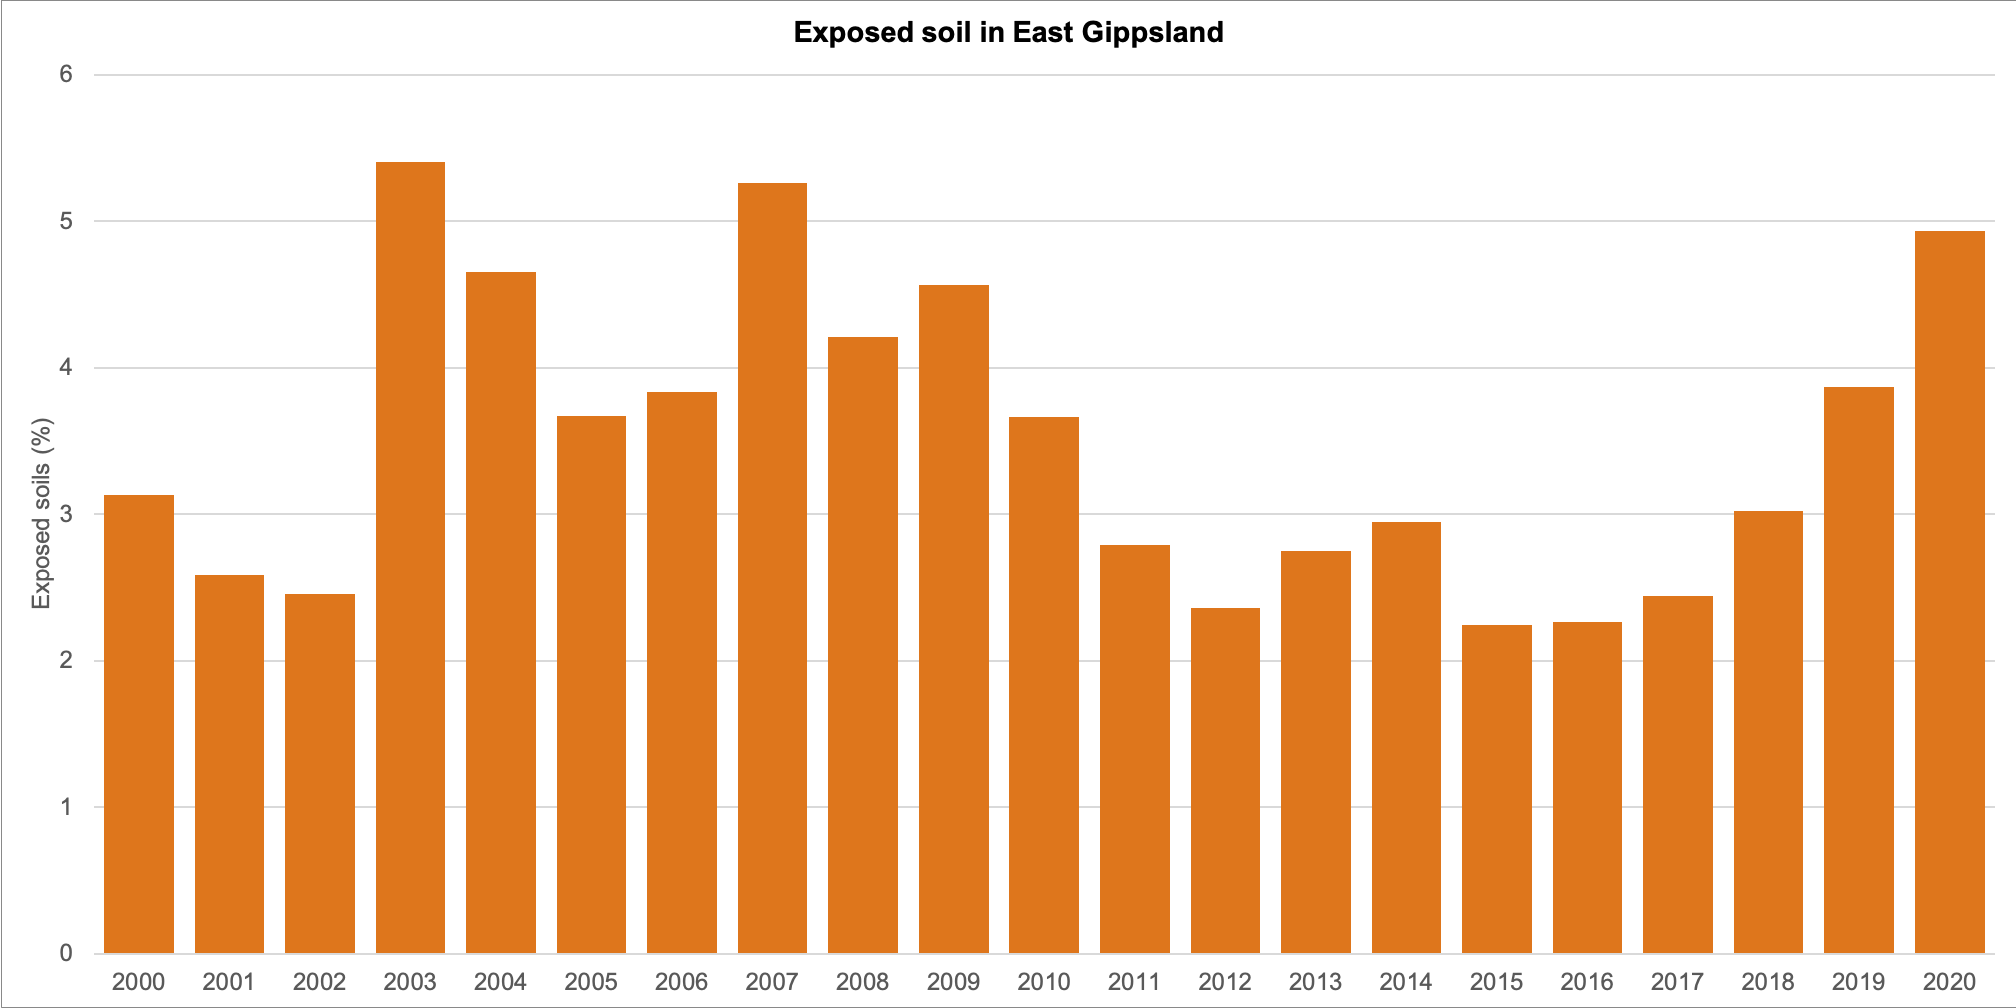 Percentage exposed soil in the East Gippsland region